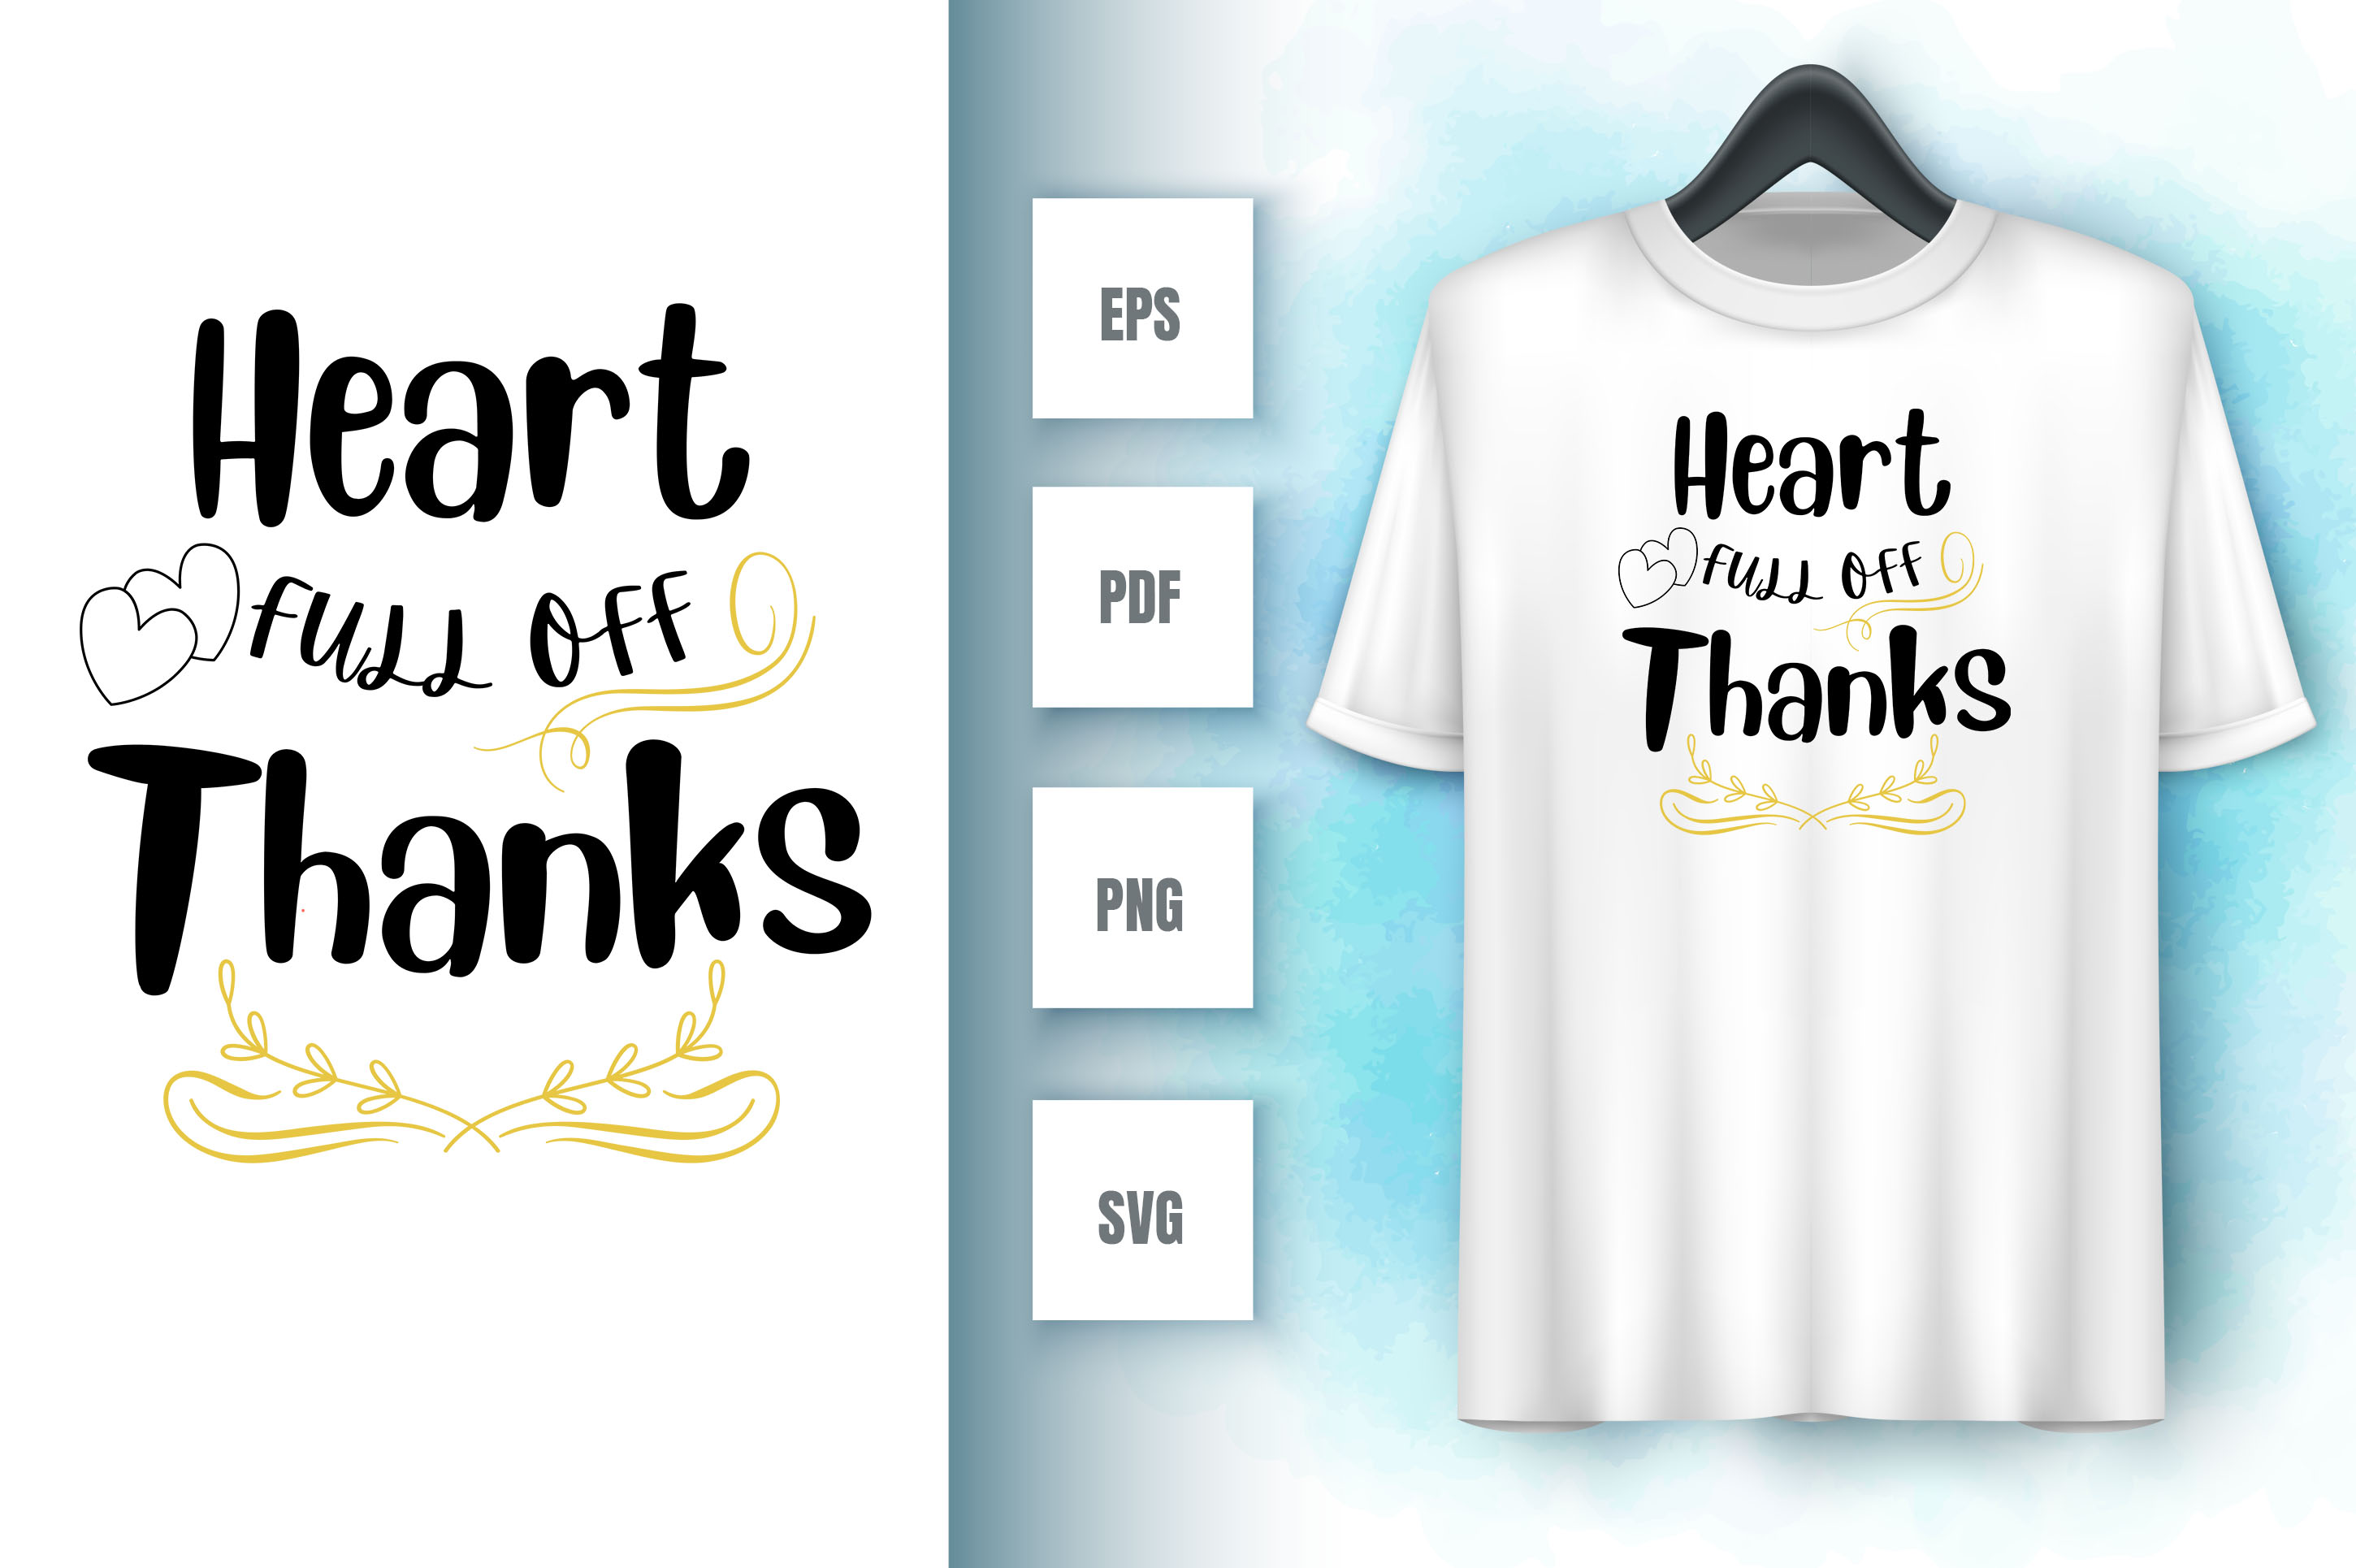 Image of a white t-shirt with an amazing inscription heart full of thanks